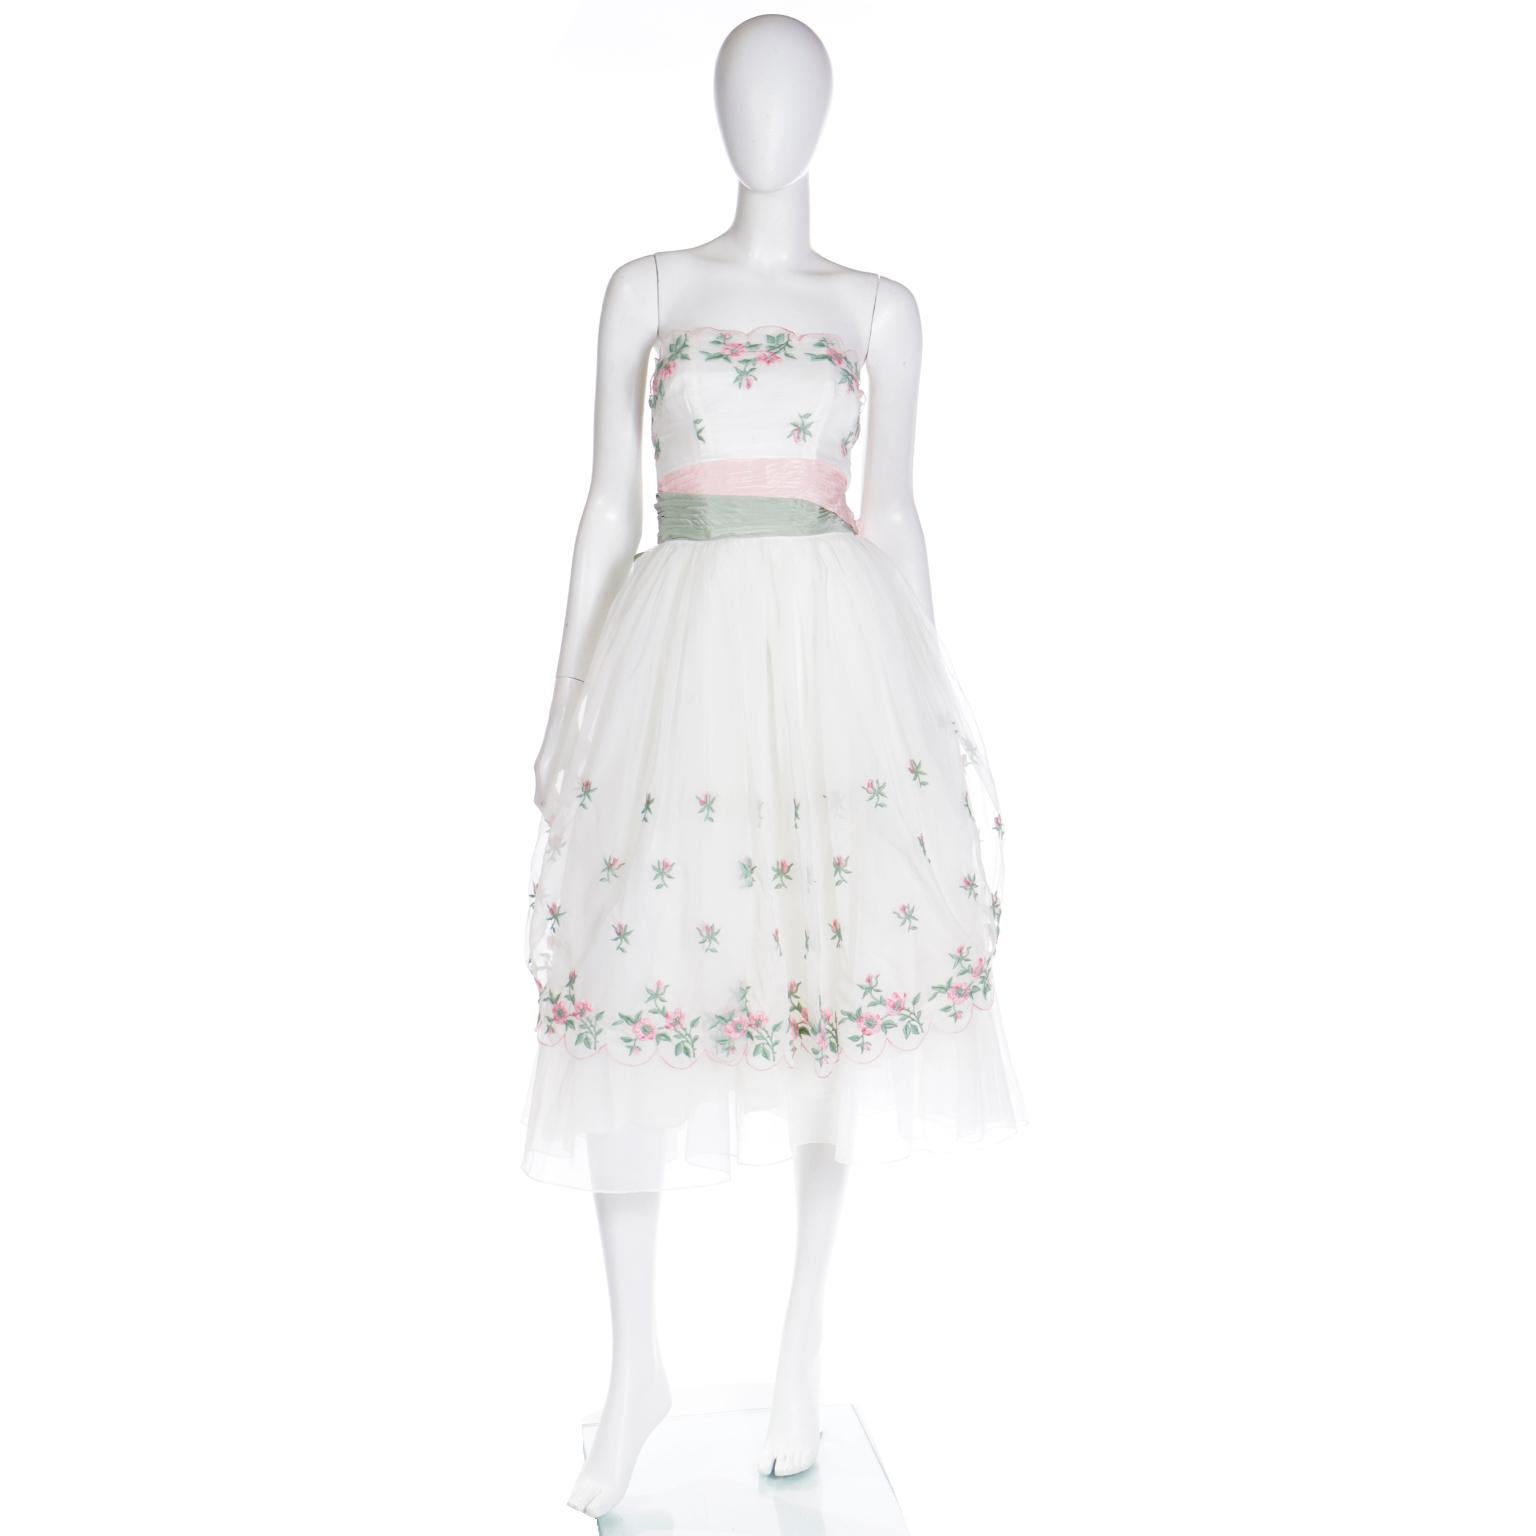 This magical vintage 1950's Emma Domb strapless party dress is in a princess cut with a full skirt. The dress is embroidered with pretty pink flowers with green leaves on the bodice and the top layer of the skirt portion. This dress has a double